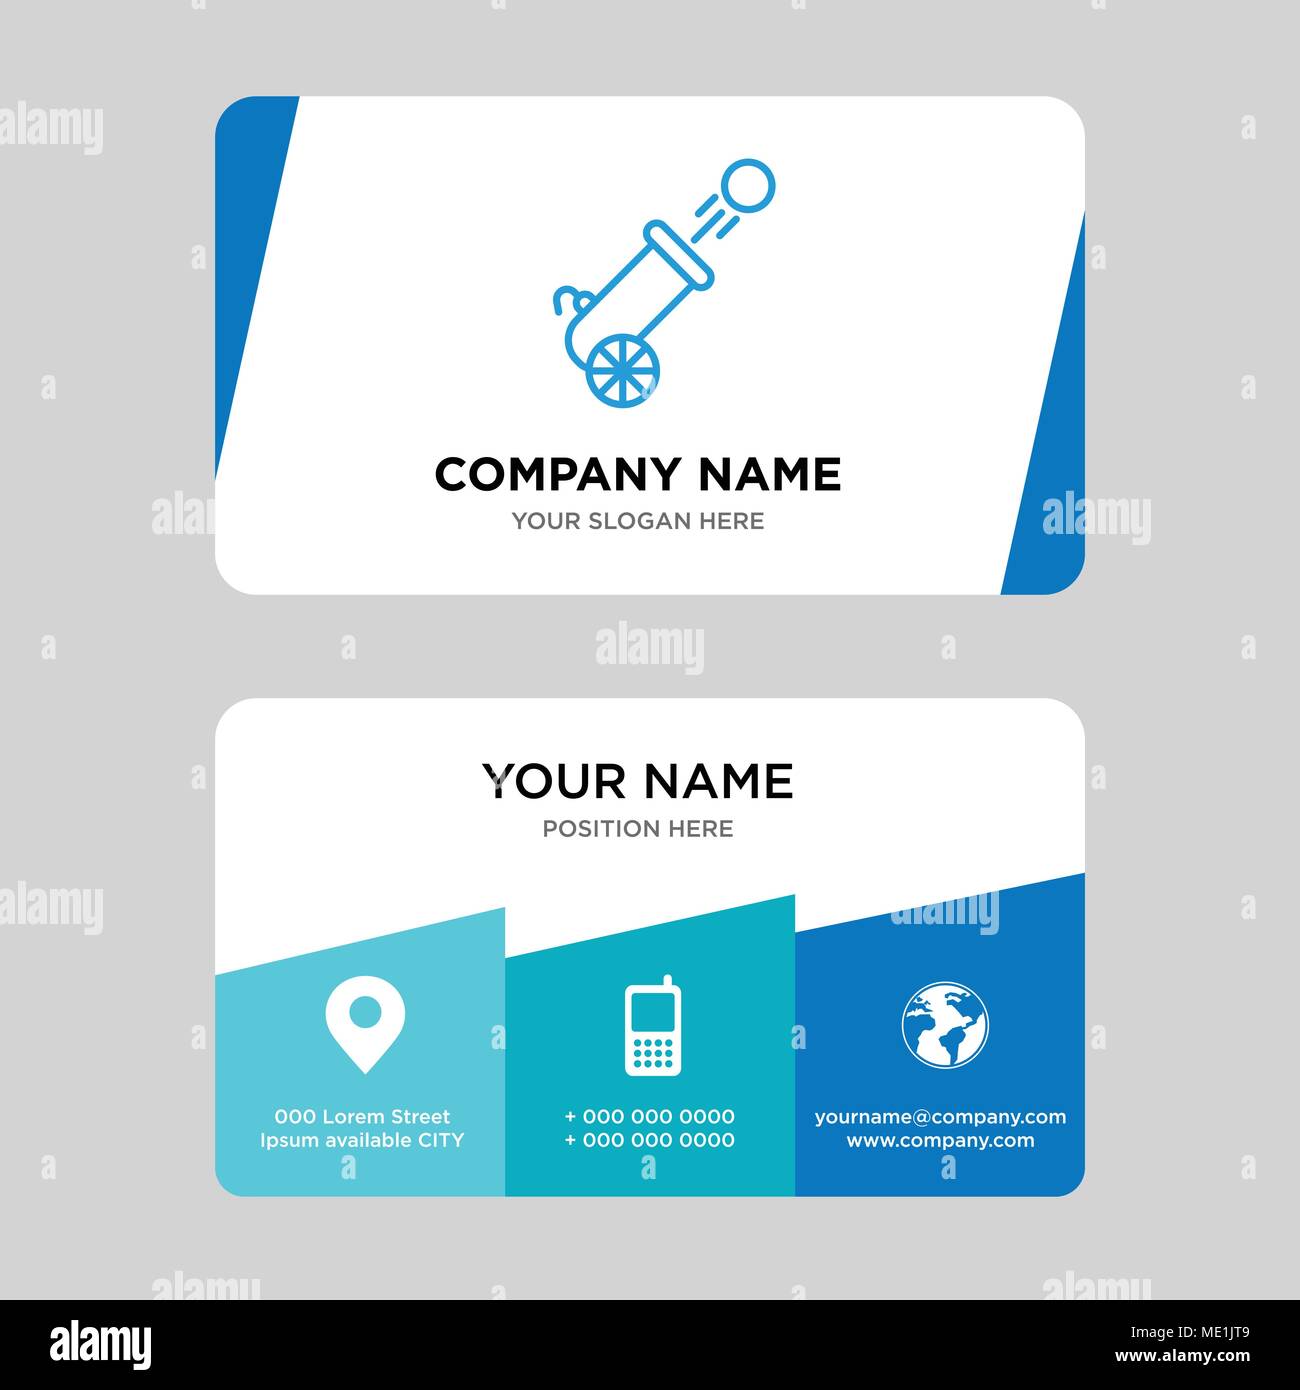 Cannon business card design template, Visiting for your company, Modern Creative and Clean identity Card Vector Illustration Stock Vector